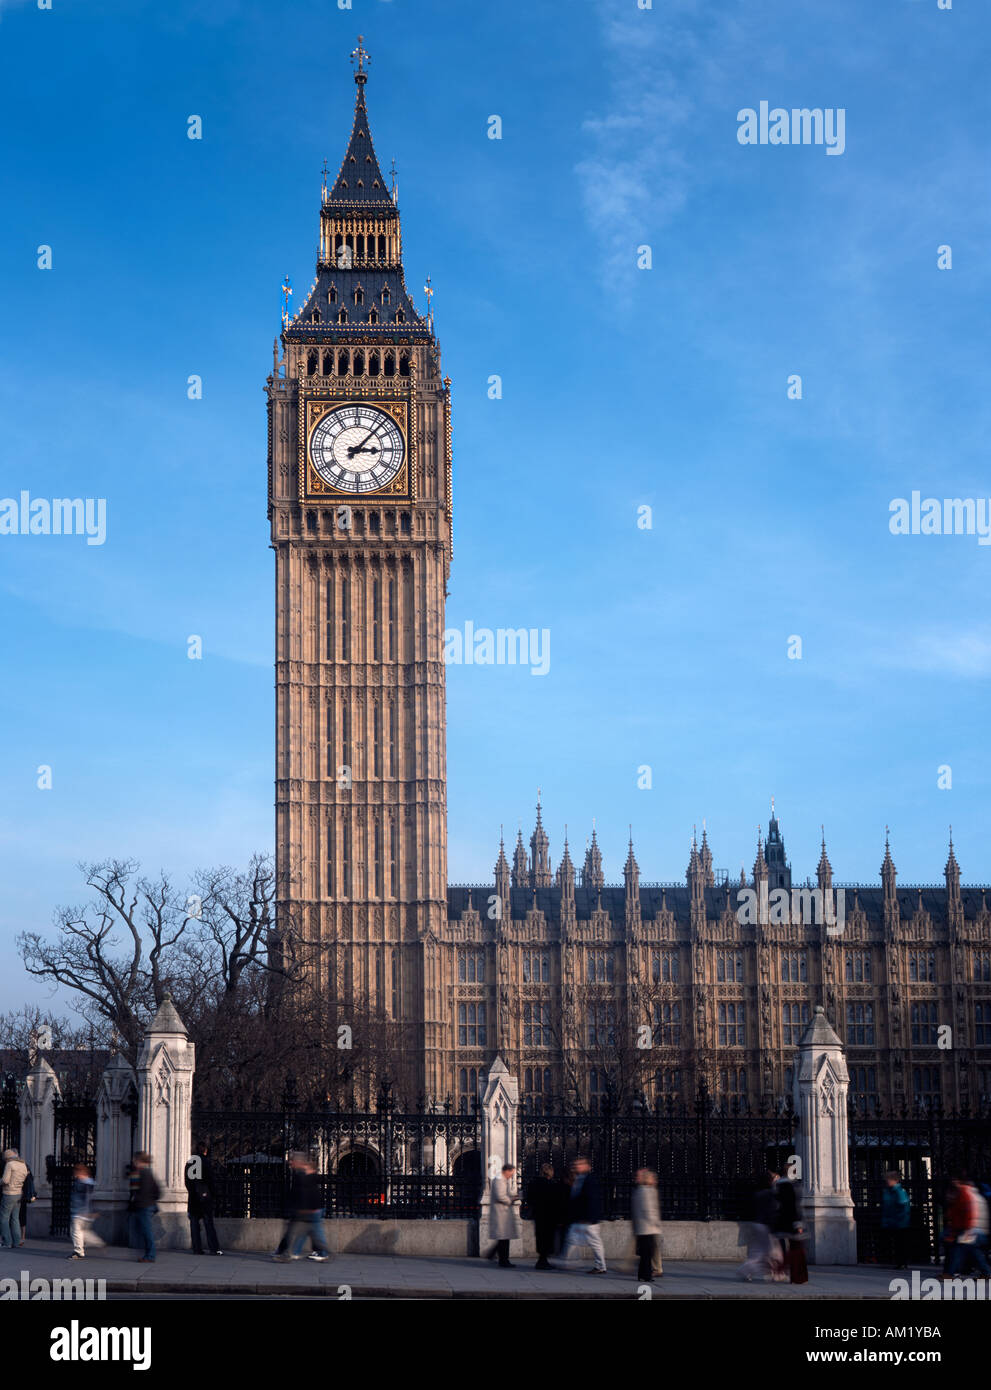 Big Ben with tourists west elevation facade Stock Photo